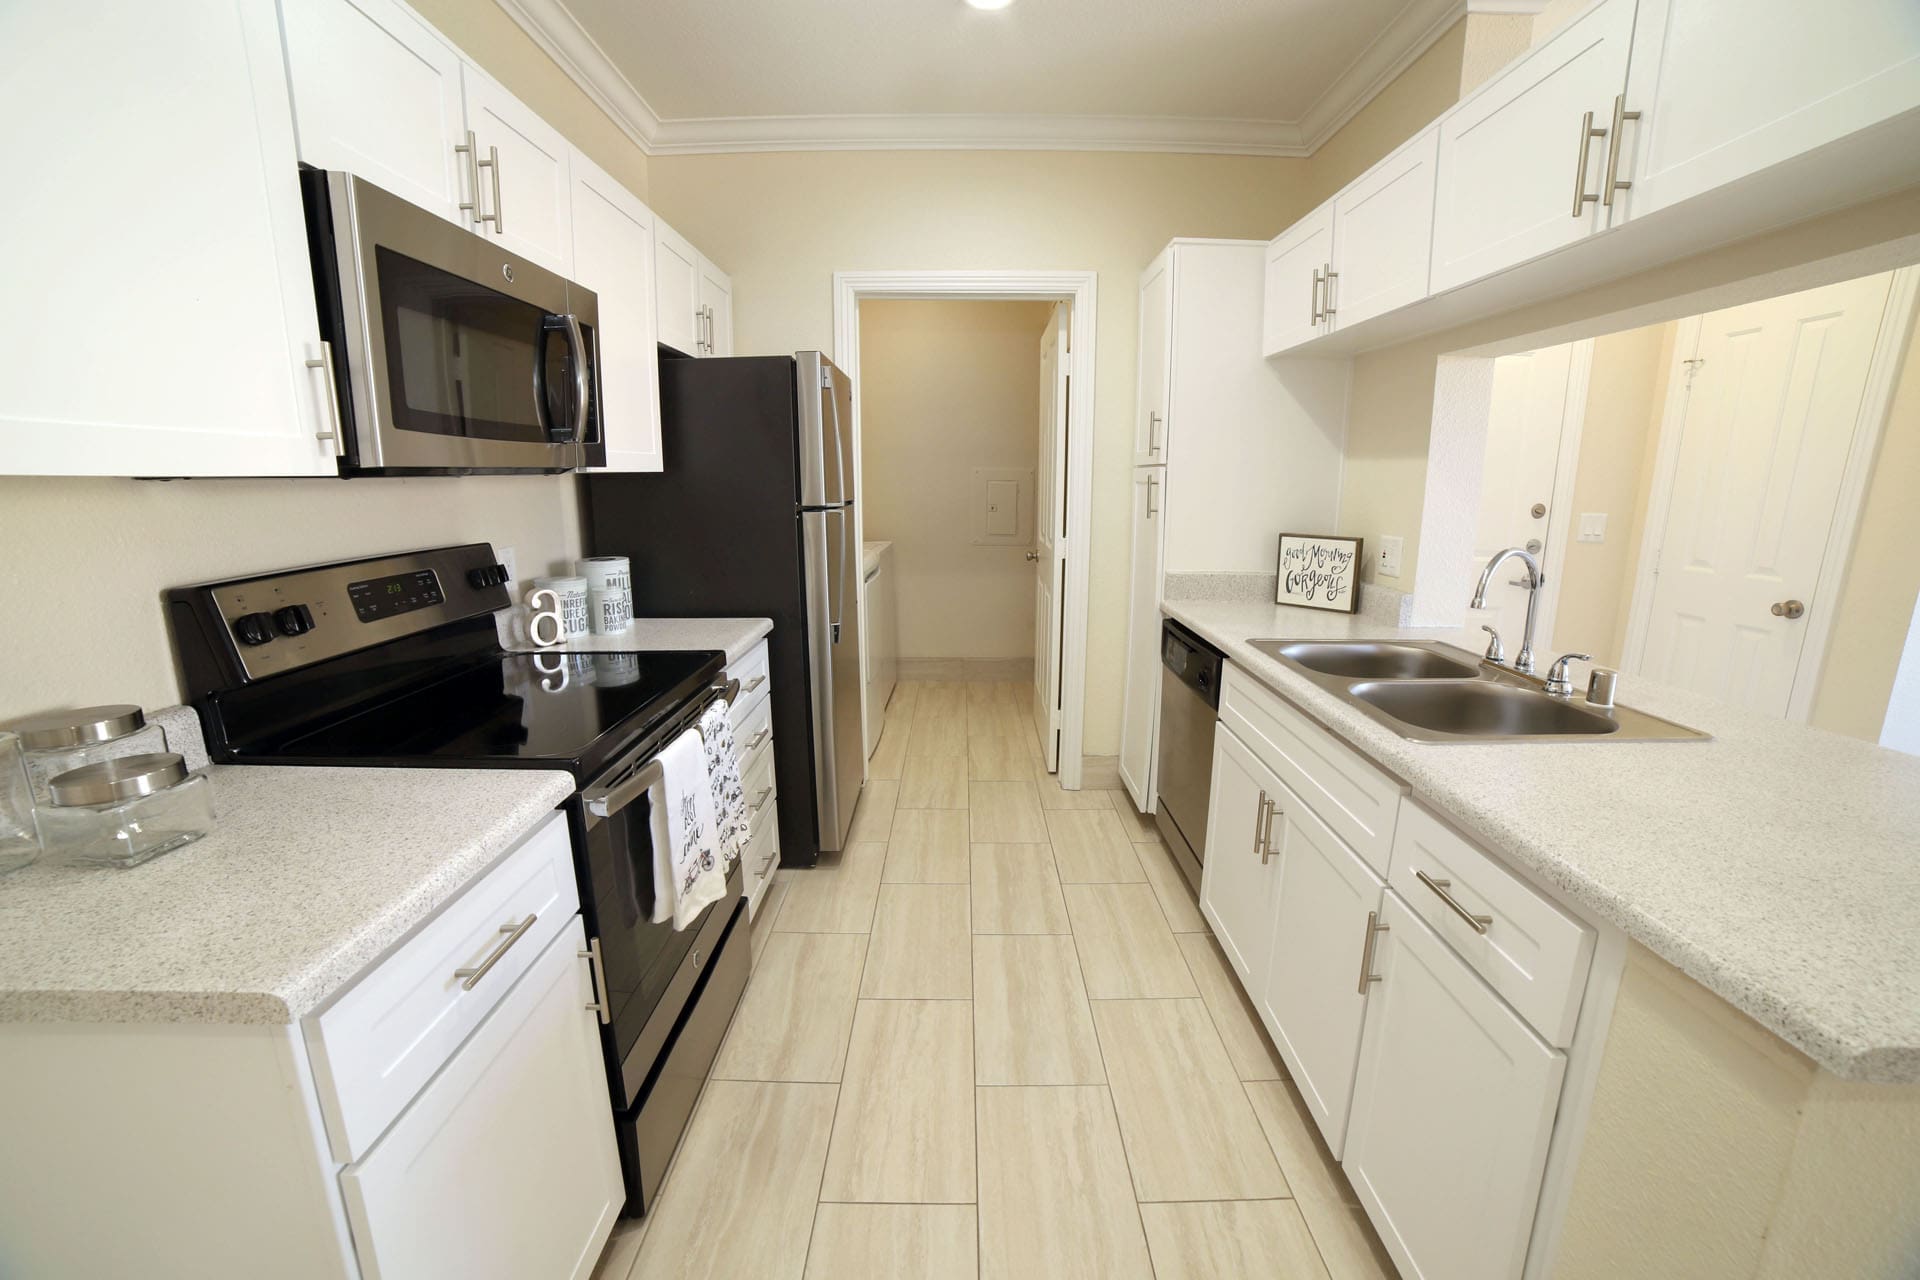 Aliso Viejo Apartments for Rent-Aventine Apartments Kitchen with Matching Appliances, White Cabinets, and Tons of Counter Top Space